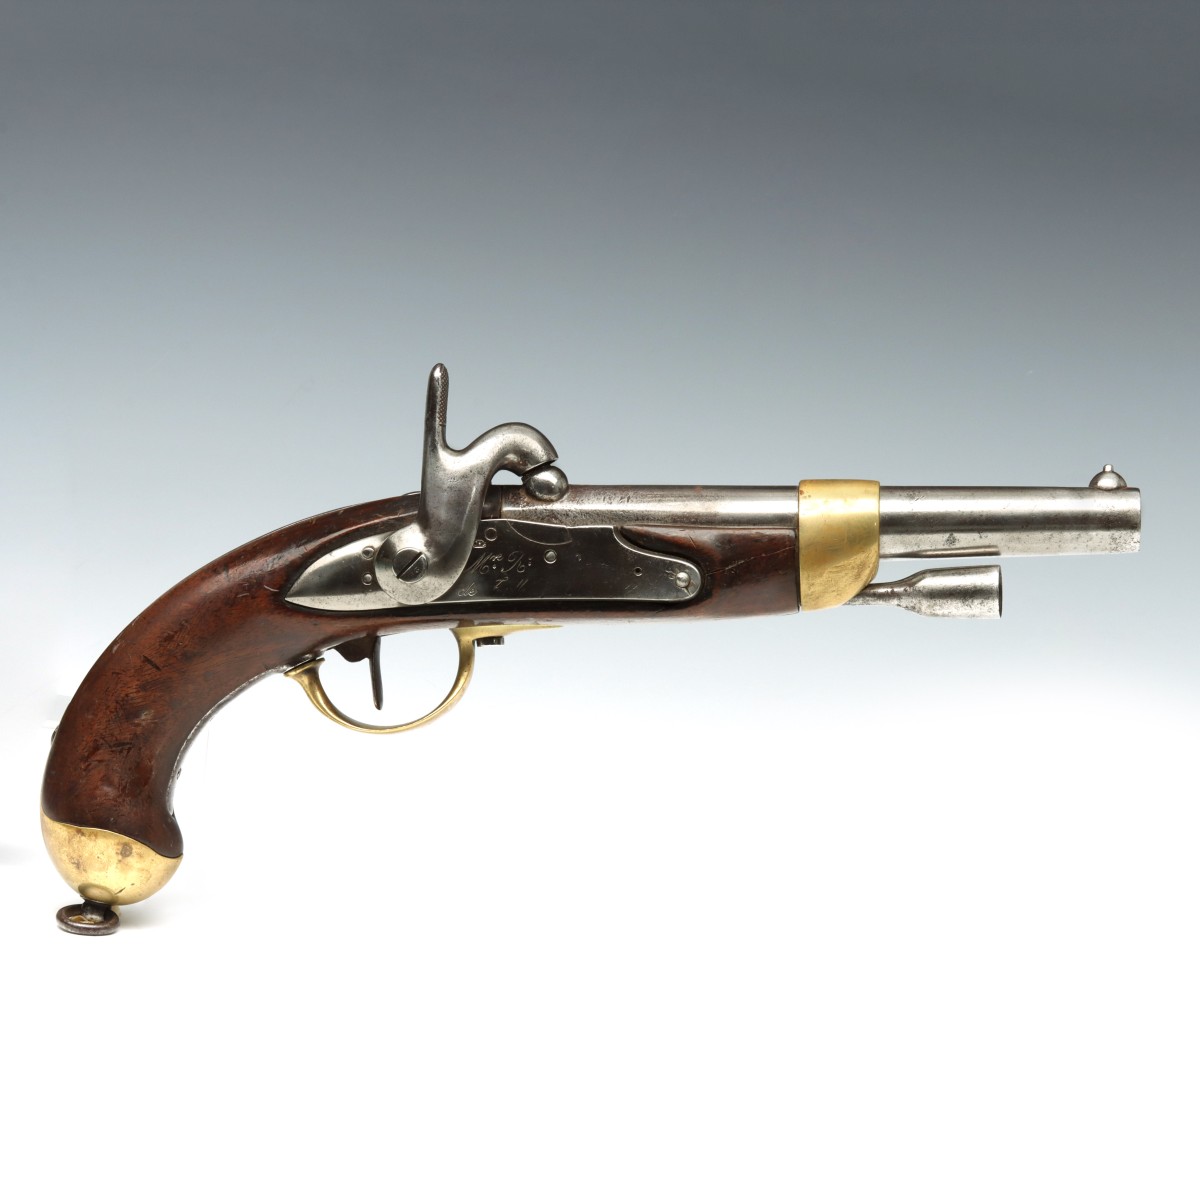 AN EARLY 19TH CENTURY FRENCH MILITARY PERCUSSION PISTOL